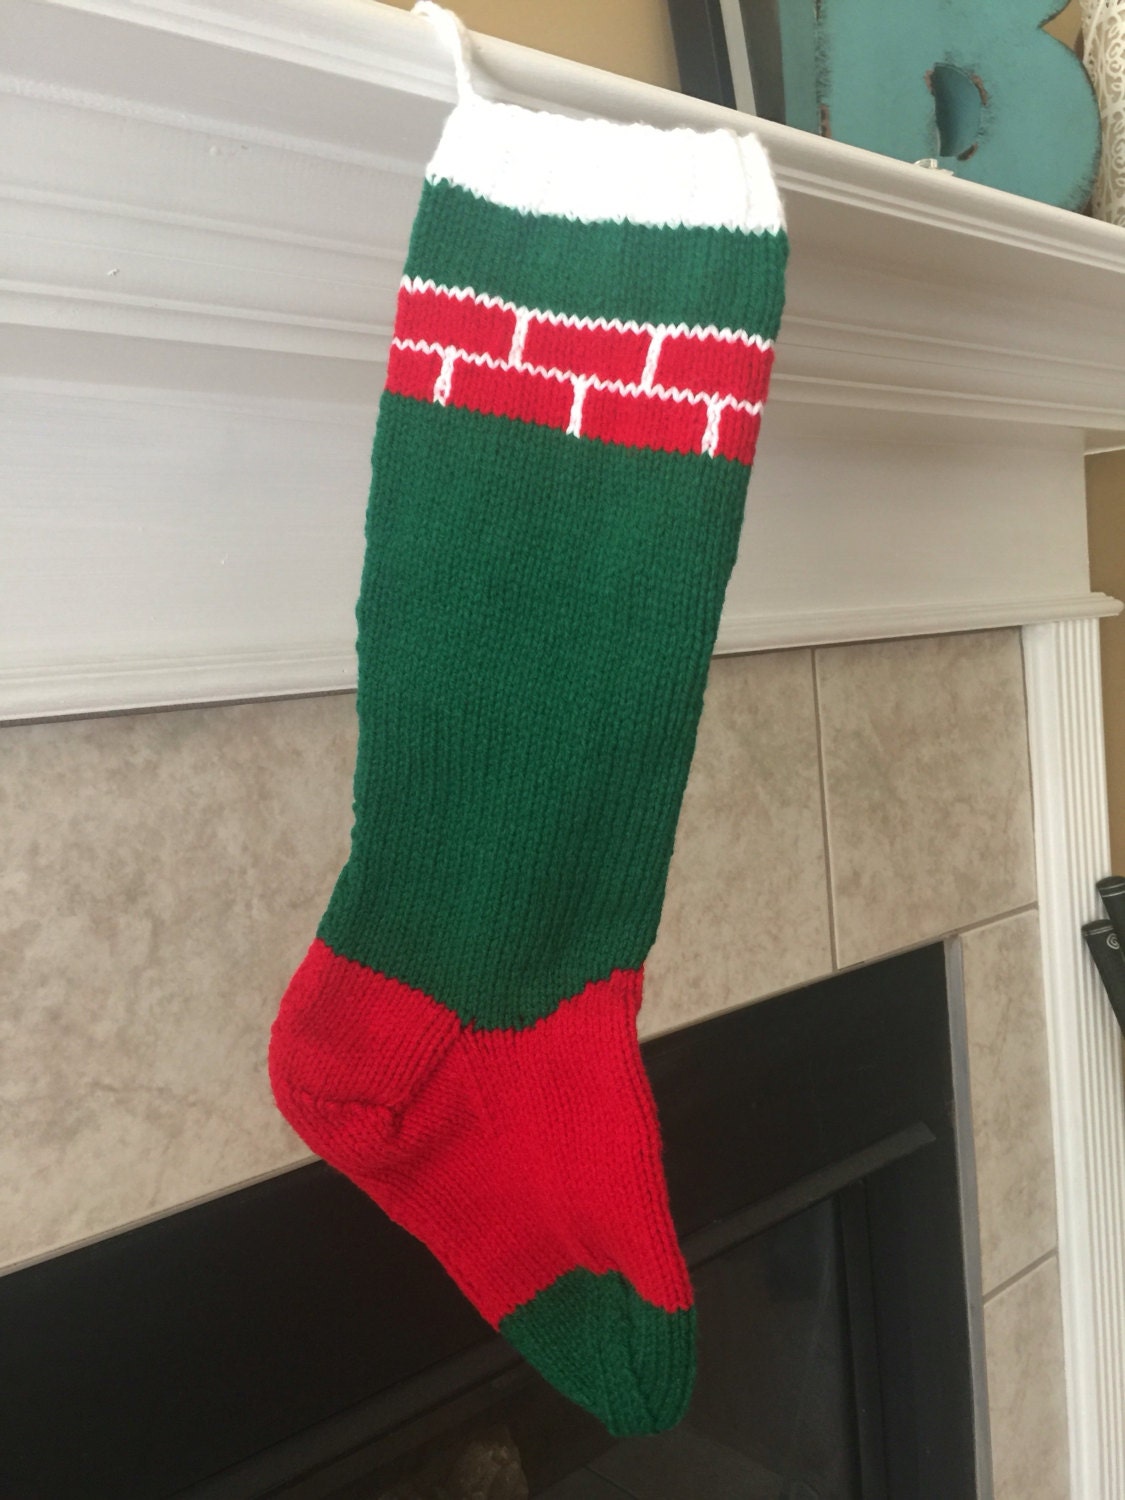 Personalized Handmade Knitted Christmas Stocking wool - Etsy